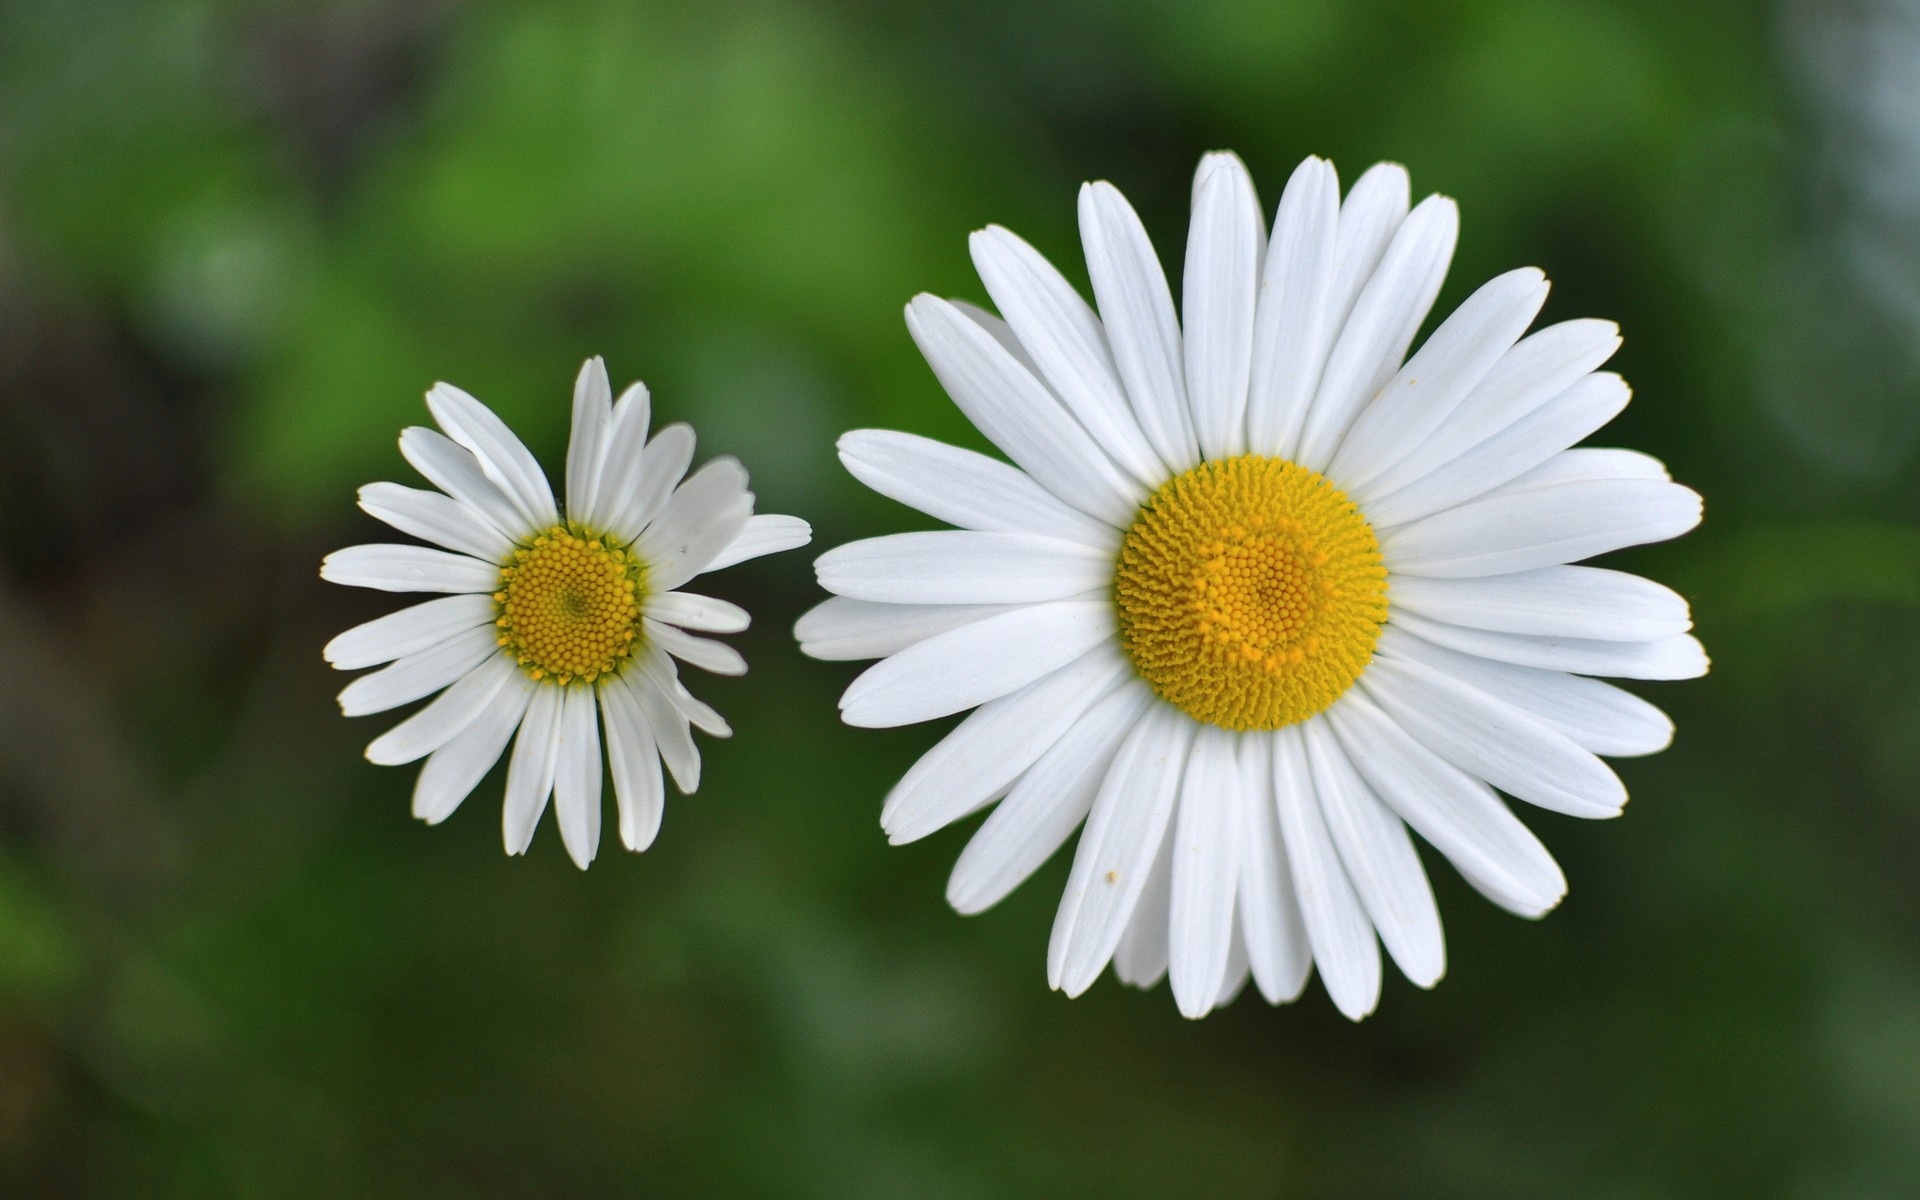 Wallpapers nature chamomile daisy on the desktop